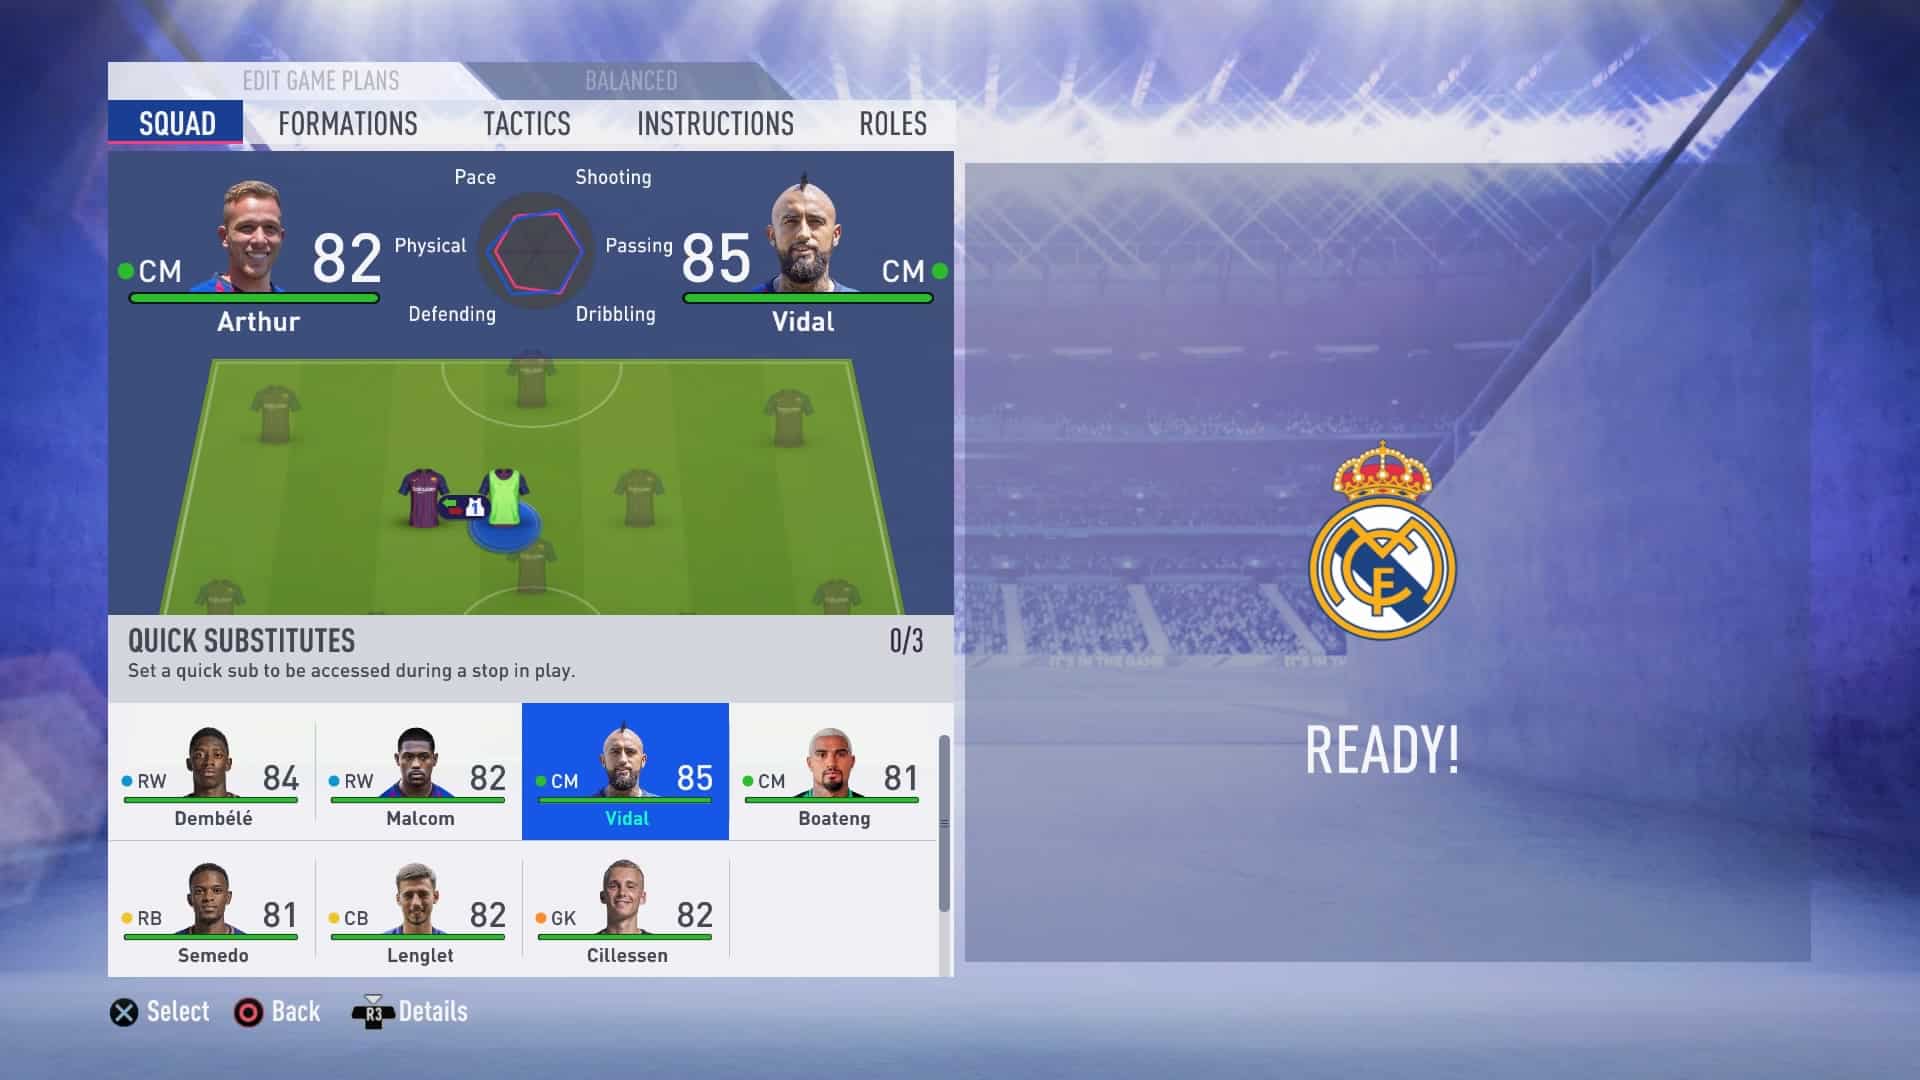 Quick subs in FIFA 19